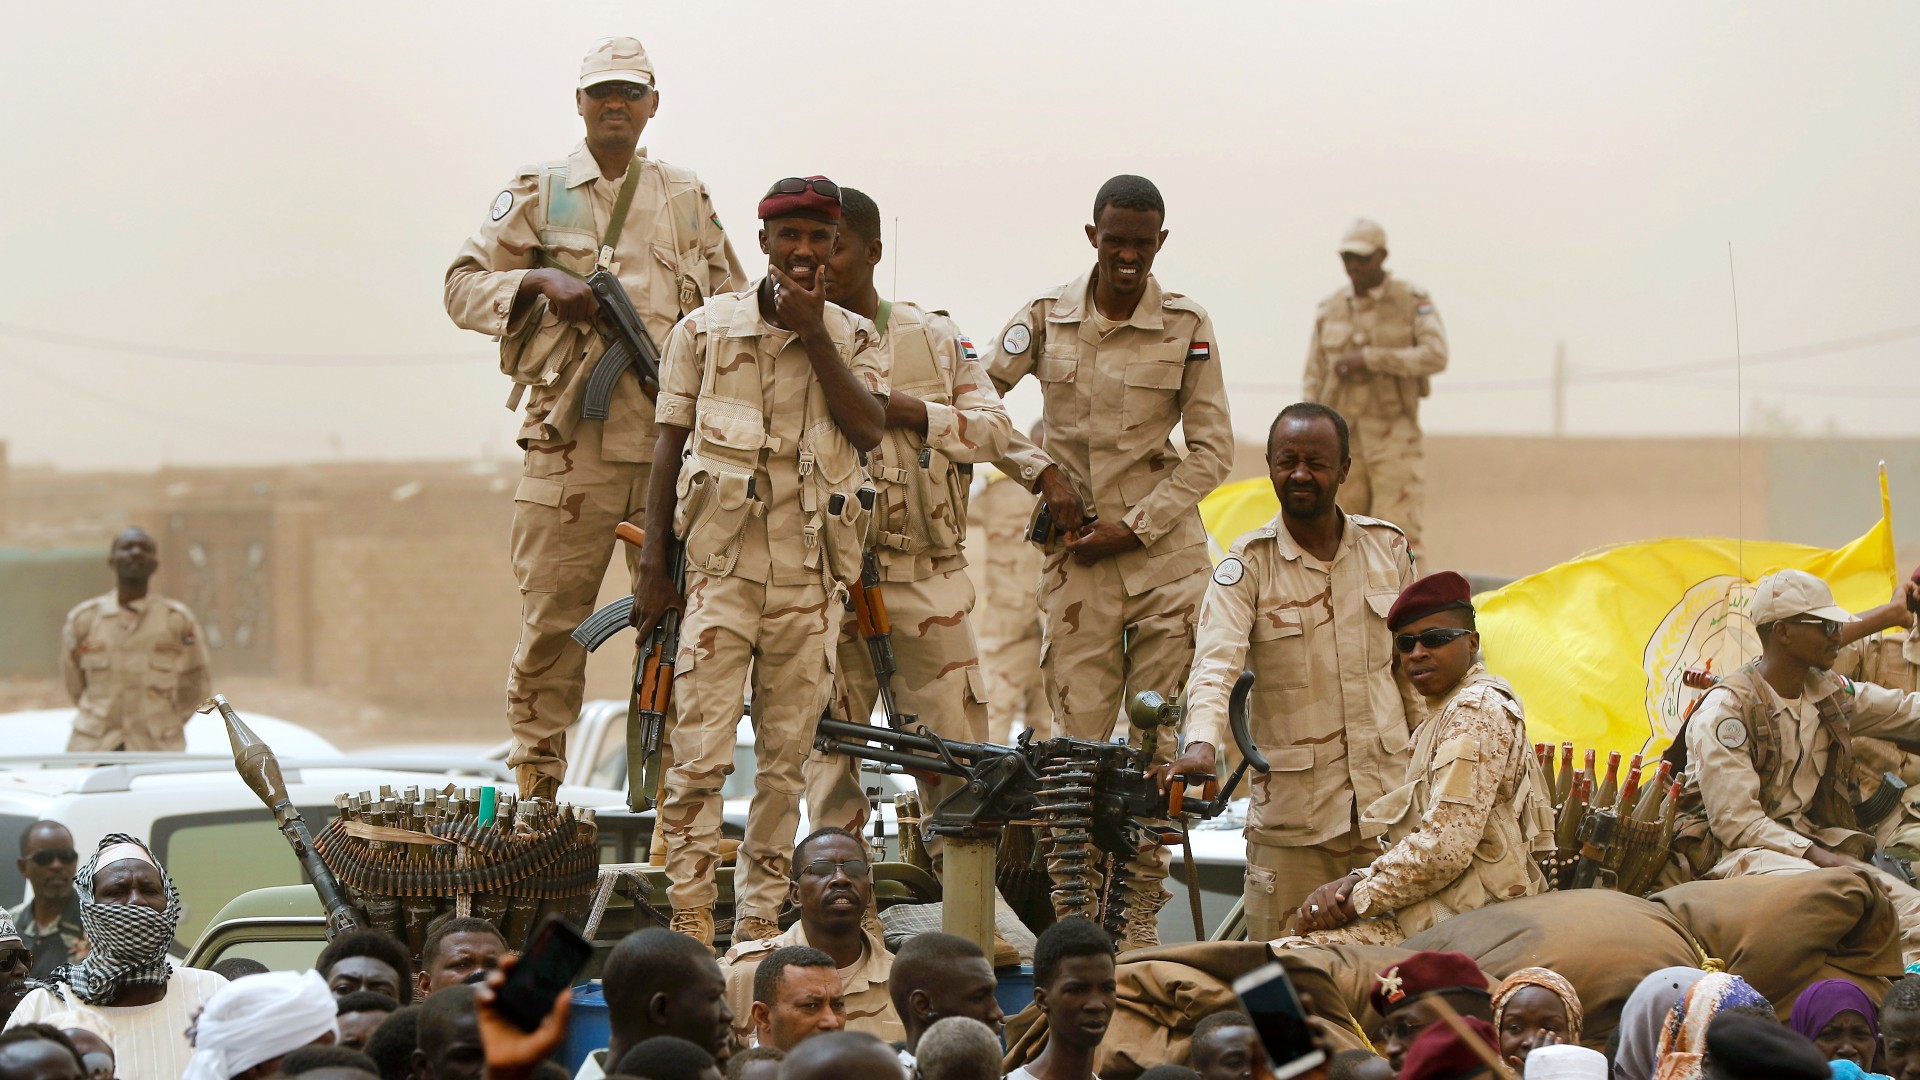 Sudanese soldiers from the Rapid Support Forces unit stand on their vehicle during a military-backed rally, in Mayo district, south of Khartoum on 29 June (AP)